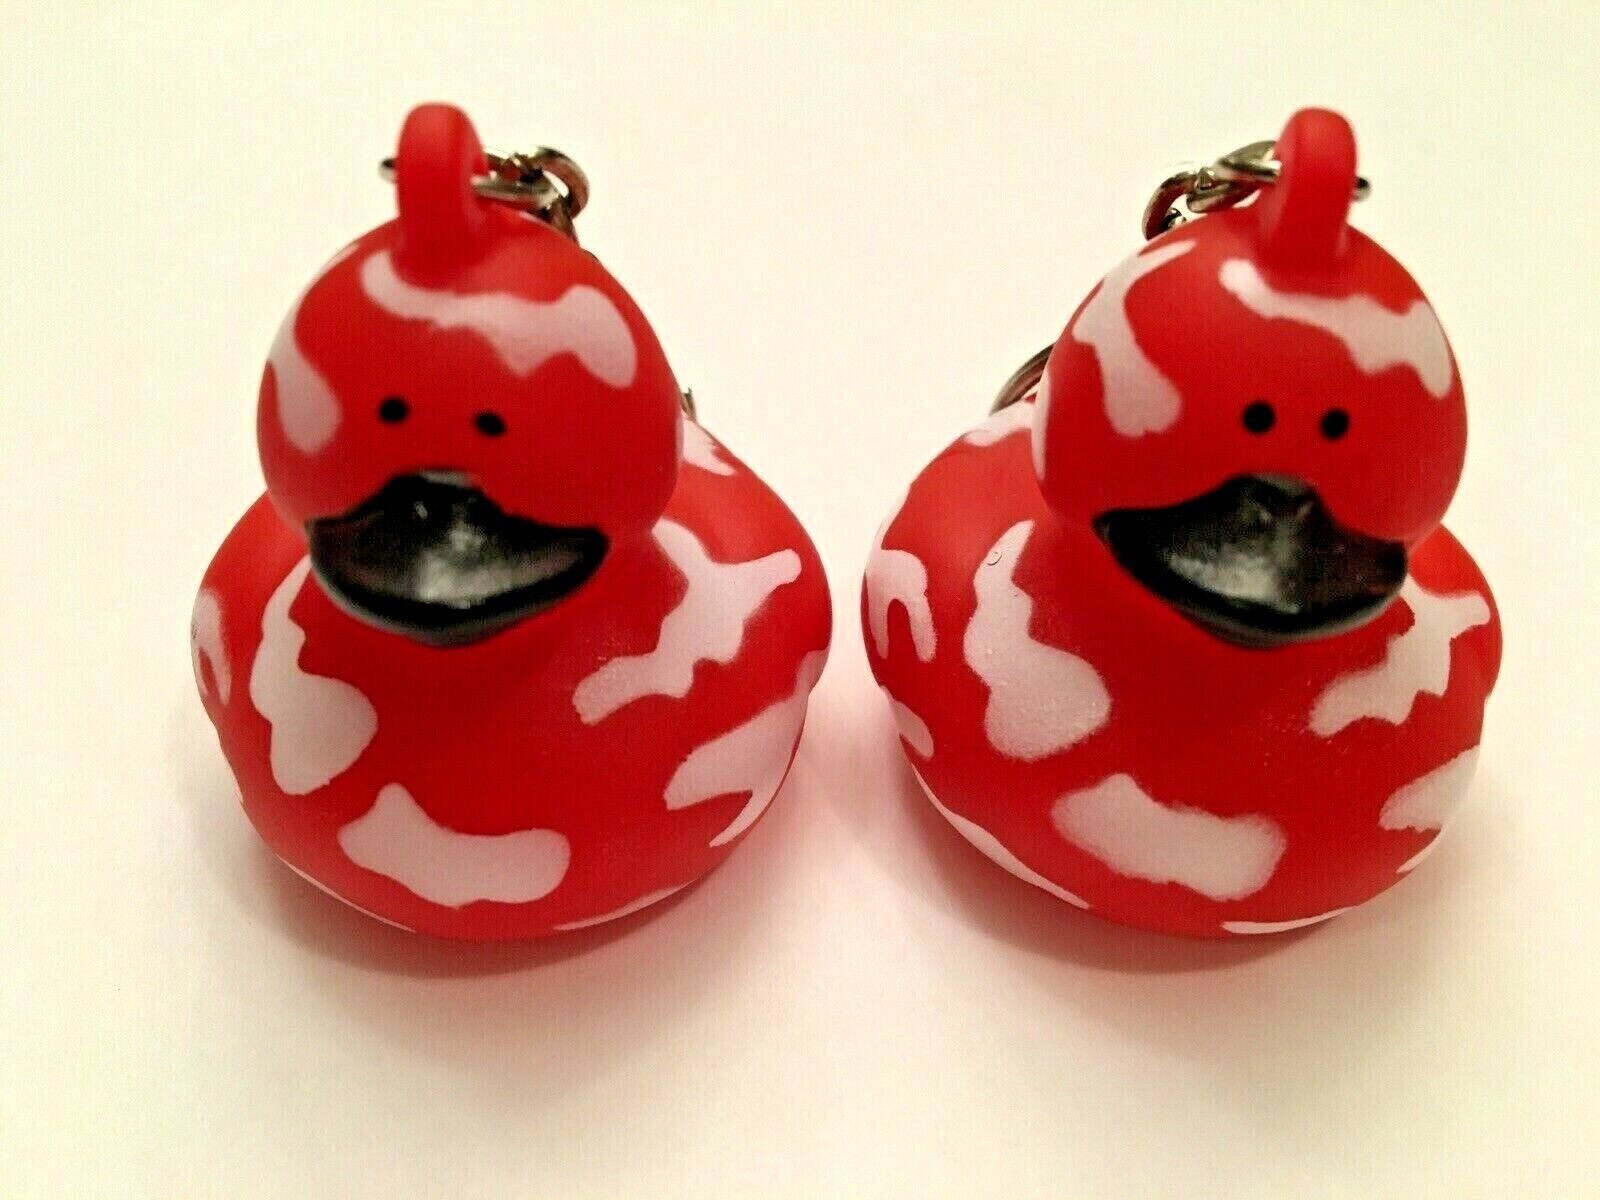 RED SPLATTER DUCK DUCKY KEY CHAINS QUACKY -RARE- (SET OF 2) *NEW*